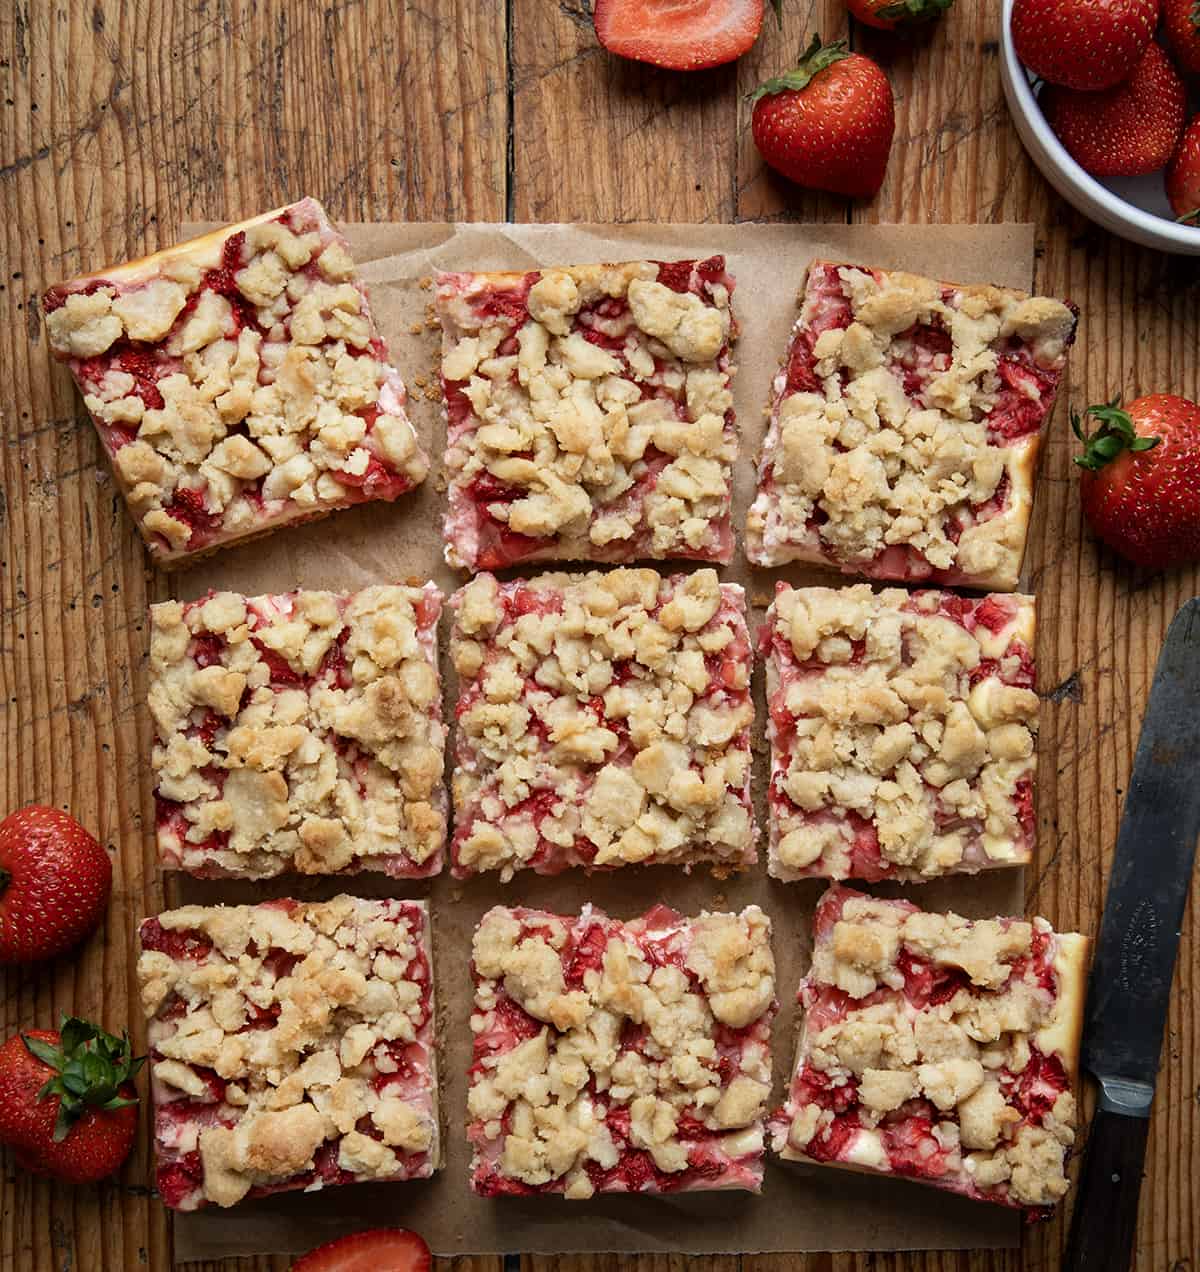 Strawberry Cheesecake Bars cut into squares on a wooden table from overhead. 